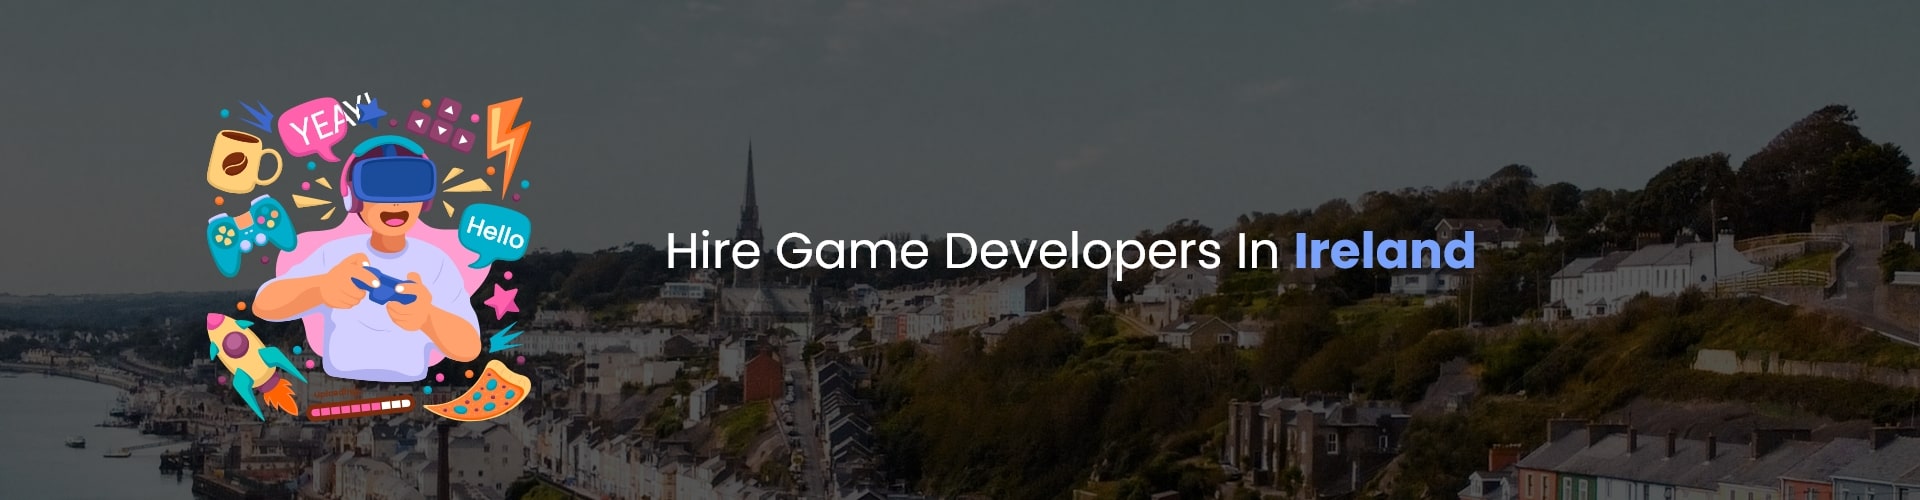 hire game developers in ireland